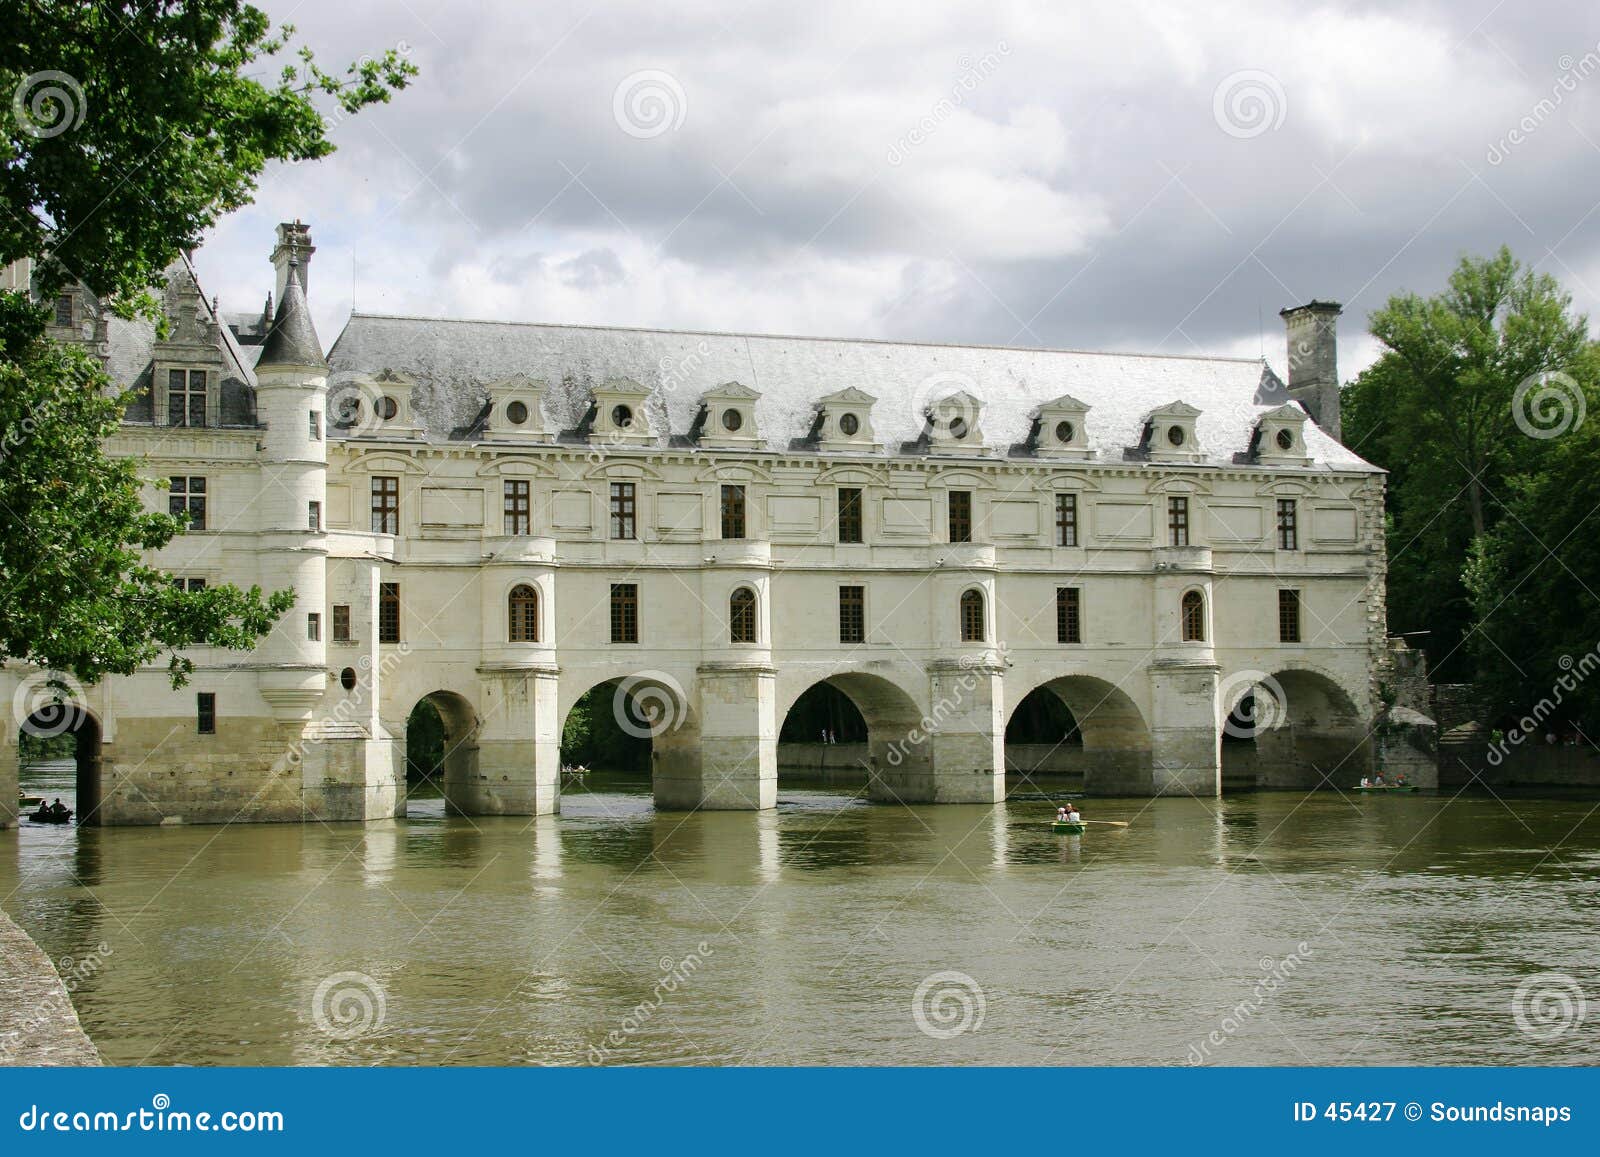 http://thumbs.dreamstime.com/z/french-chateau-loire-45427.jpg